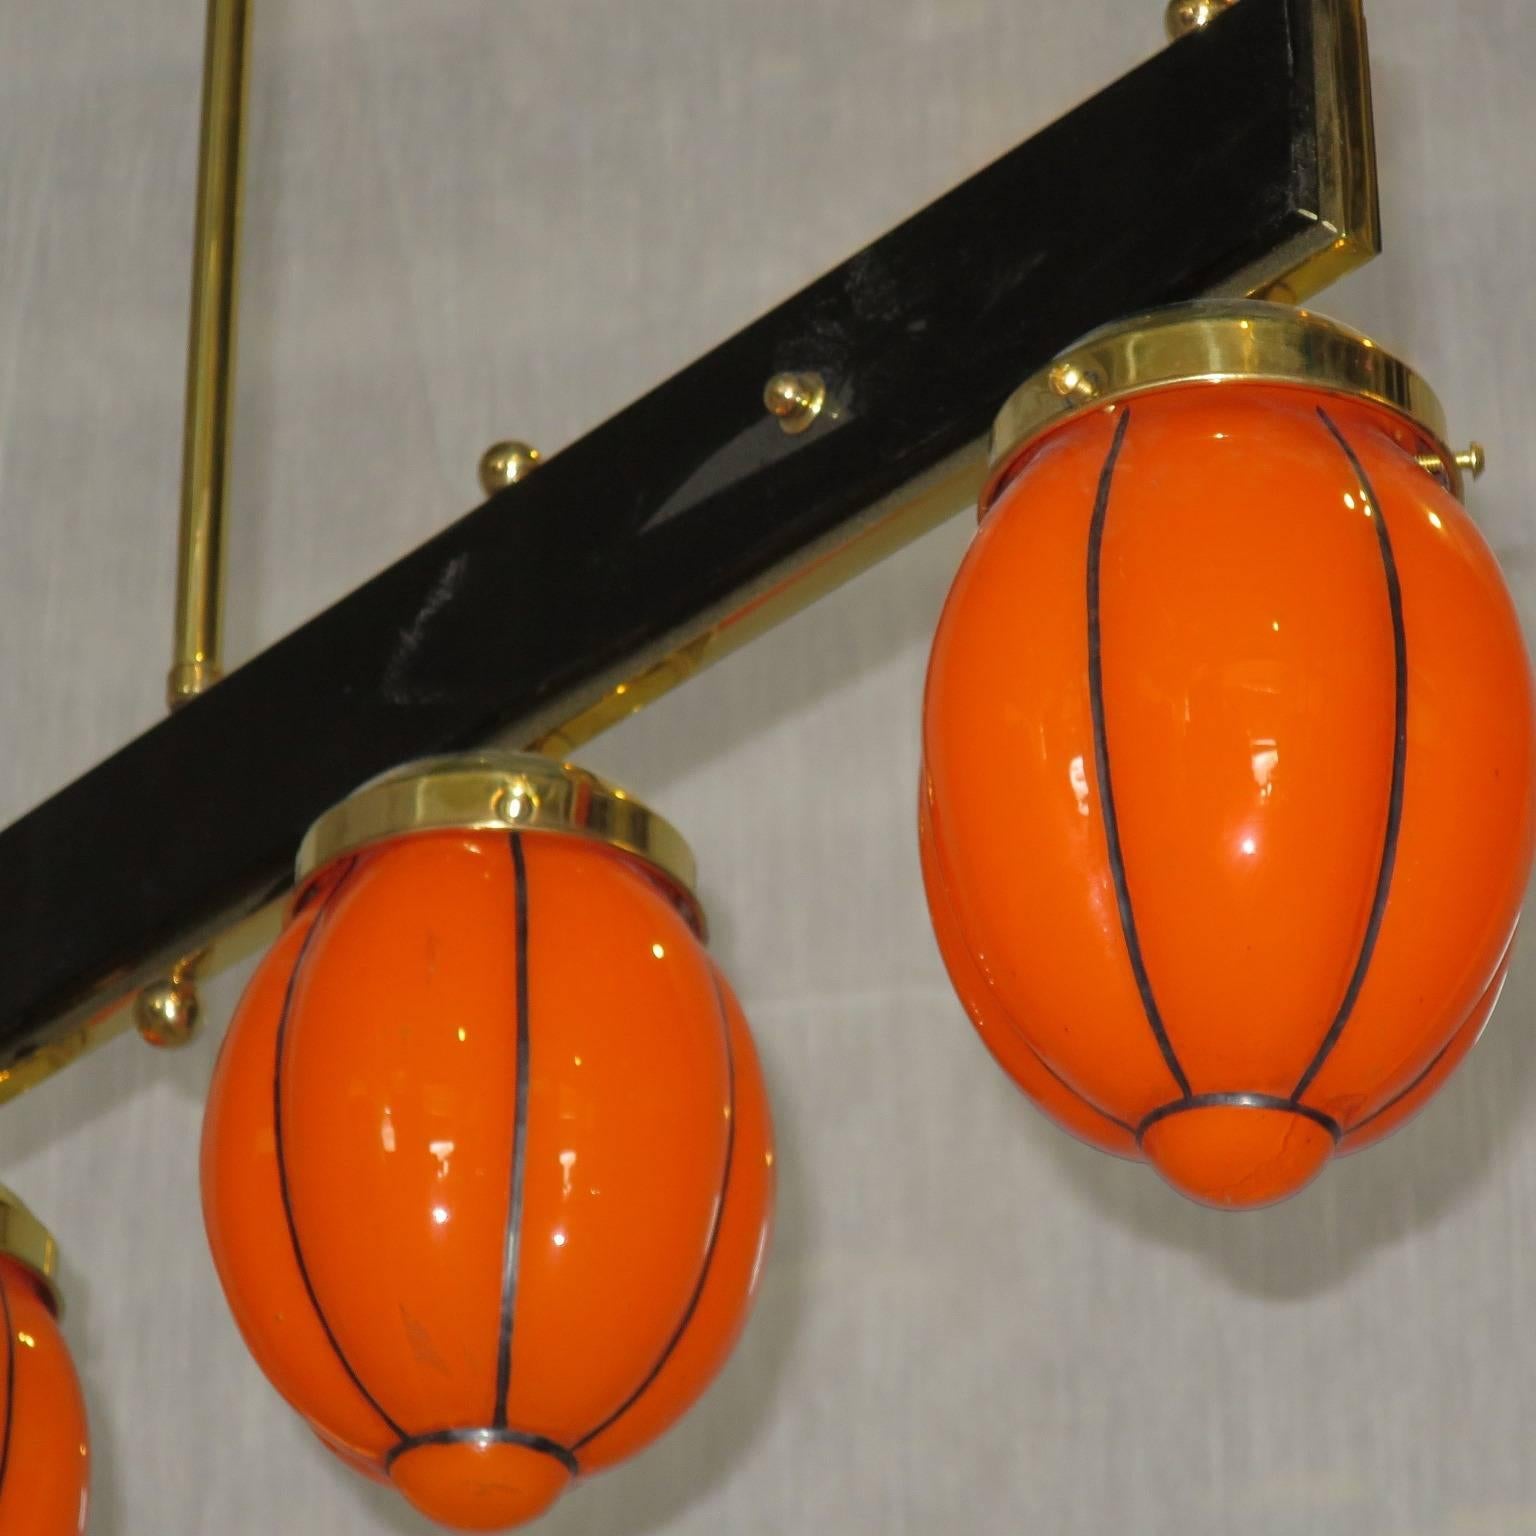 Italian midcentury colored glass chandelier,
double face black glass bar hanging by a brass tube from the ceiling.
Underneath are aligned four balls in blown transparent orange glass.
The chandelier is from the midcentury design period.
The